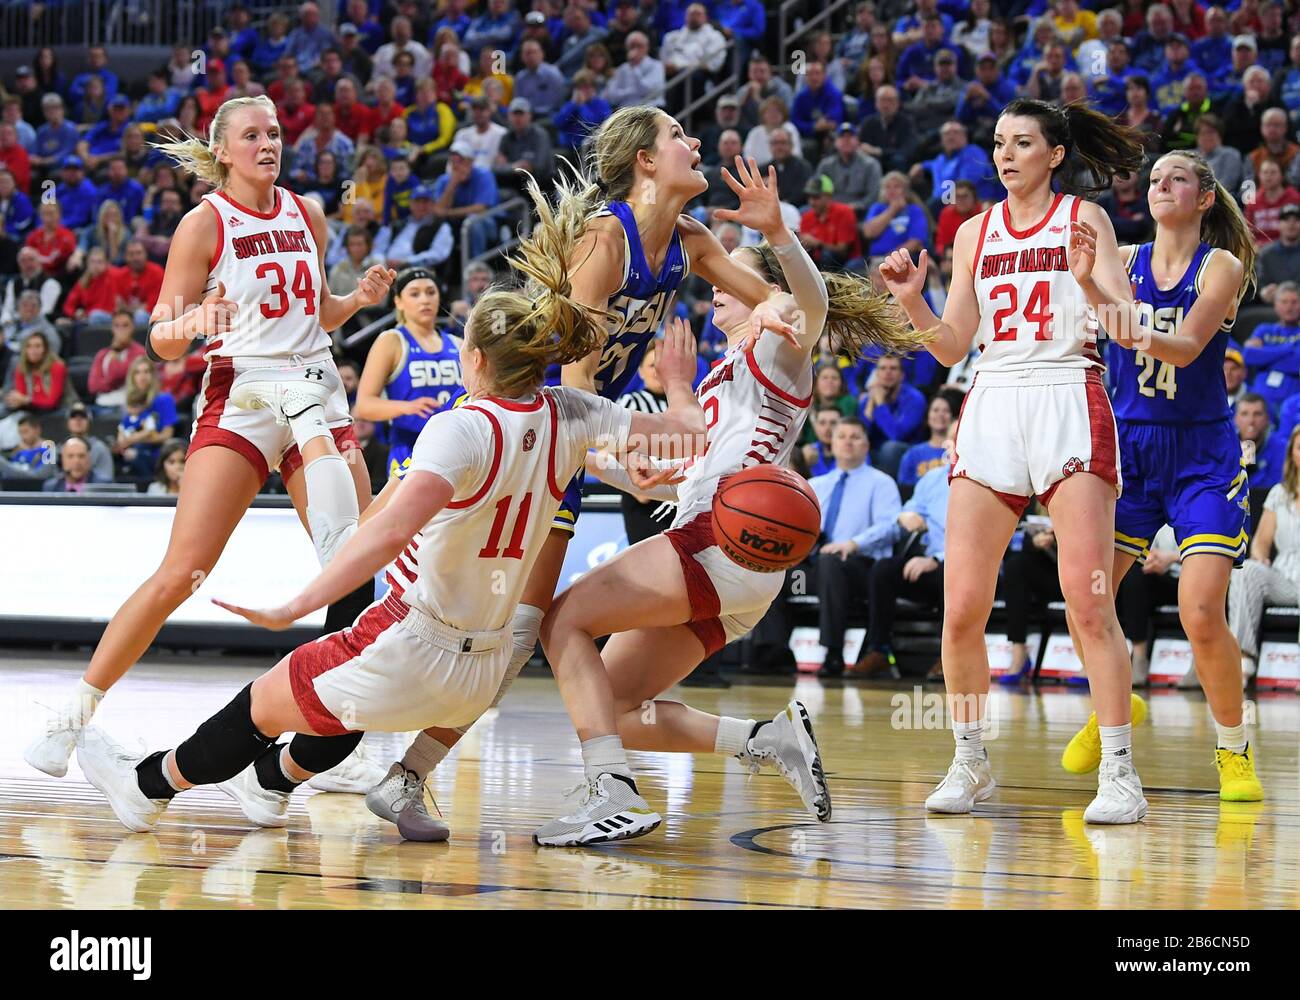 March 10, 2020: South Dakota State Jackrabbits guard Tylee Irwin (21) knocks over several defenders on her way to the basket in the Summit League women's championship basketball game between the South Dakota State Jackrabbits and the South Dakota Coyotes at the Denny Sanford Premier Center, Sioux Falls, SD. South Dakota defeated South Dakota State 63-58 and move on to the NCAA tournament. Photo by Russell Hons/CSM Stock Photo